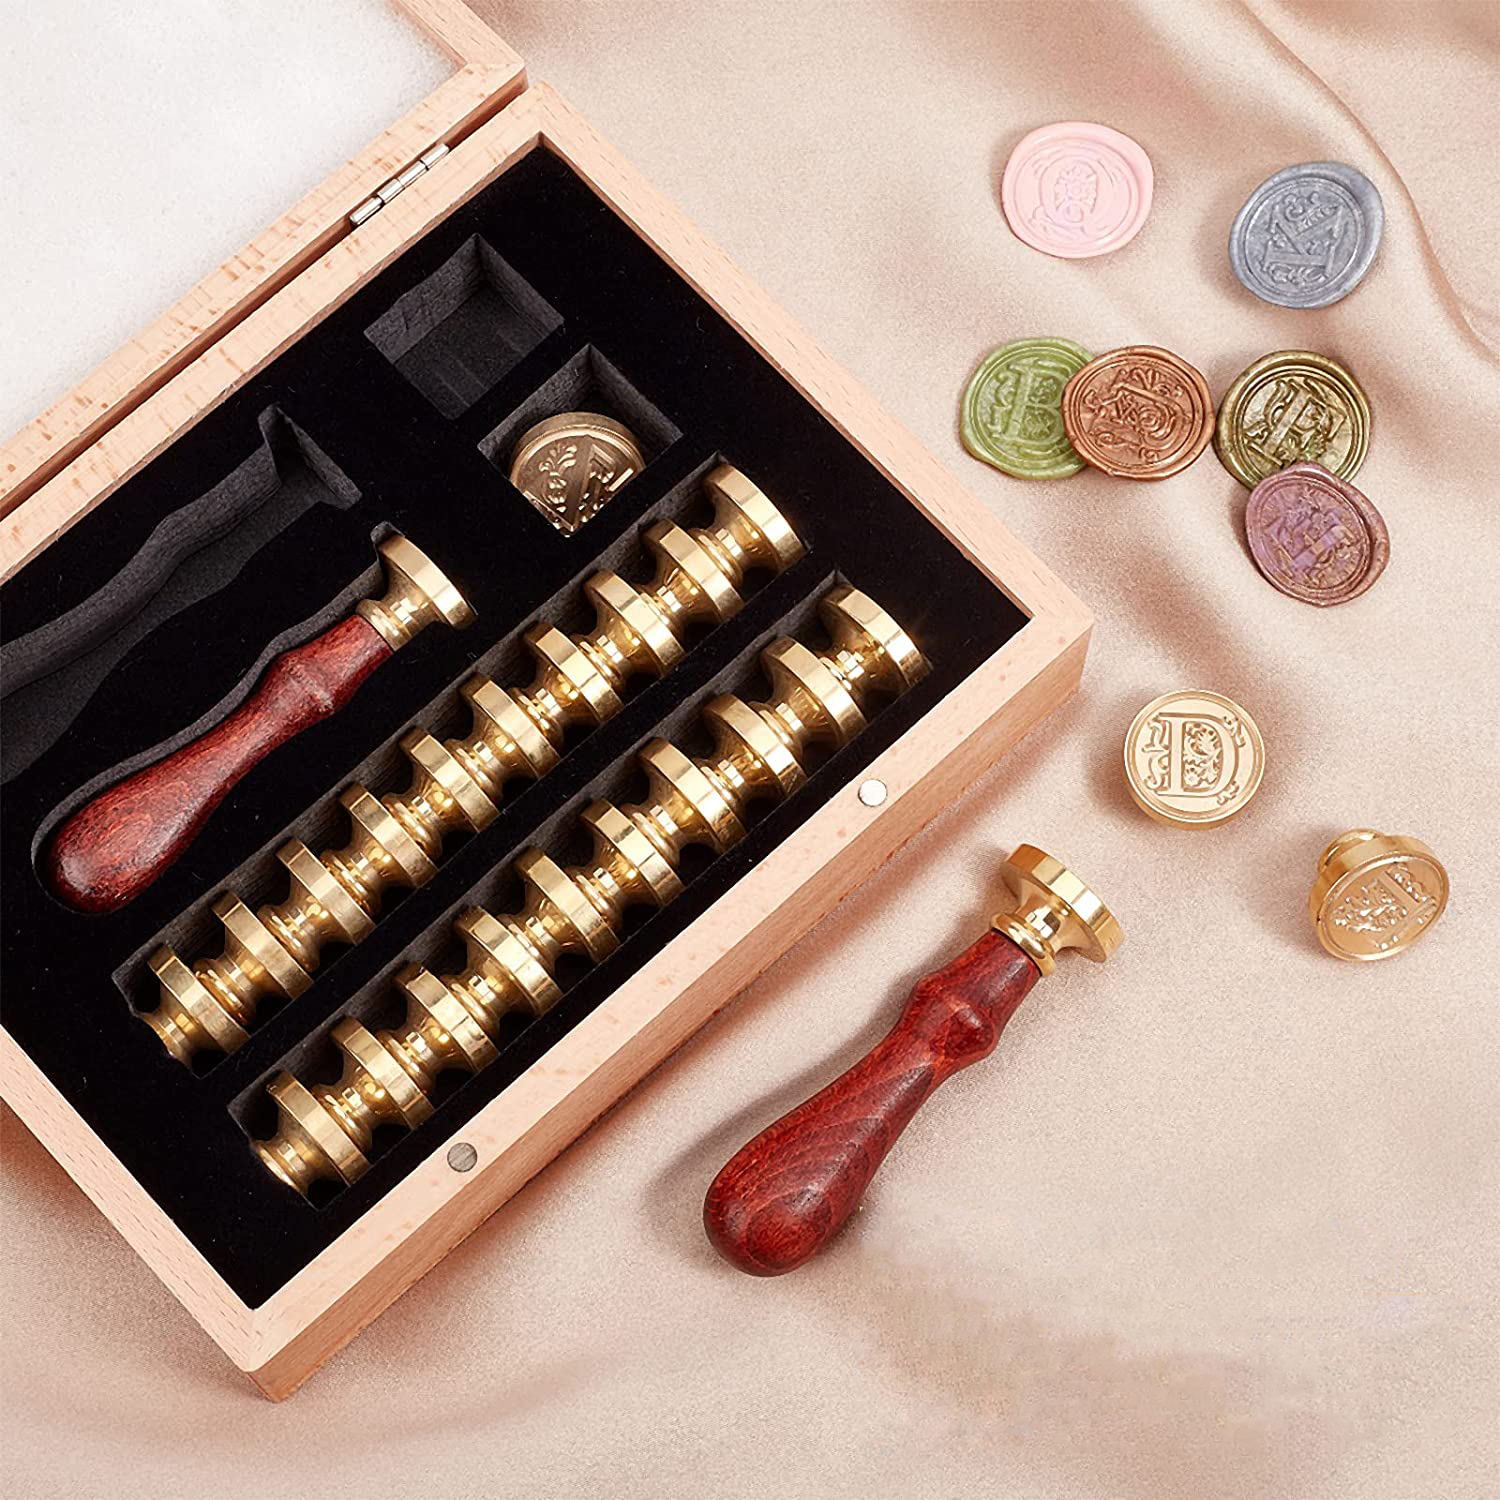 High-Quality Wax Seal Stamp Kit - Initial Letters Alphabet Set - Gift Box